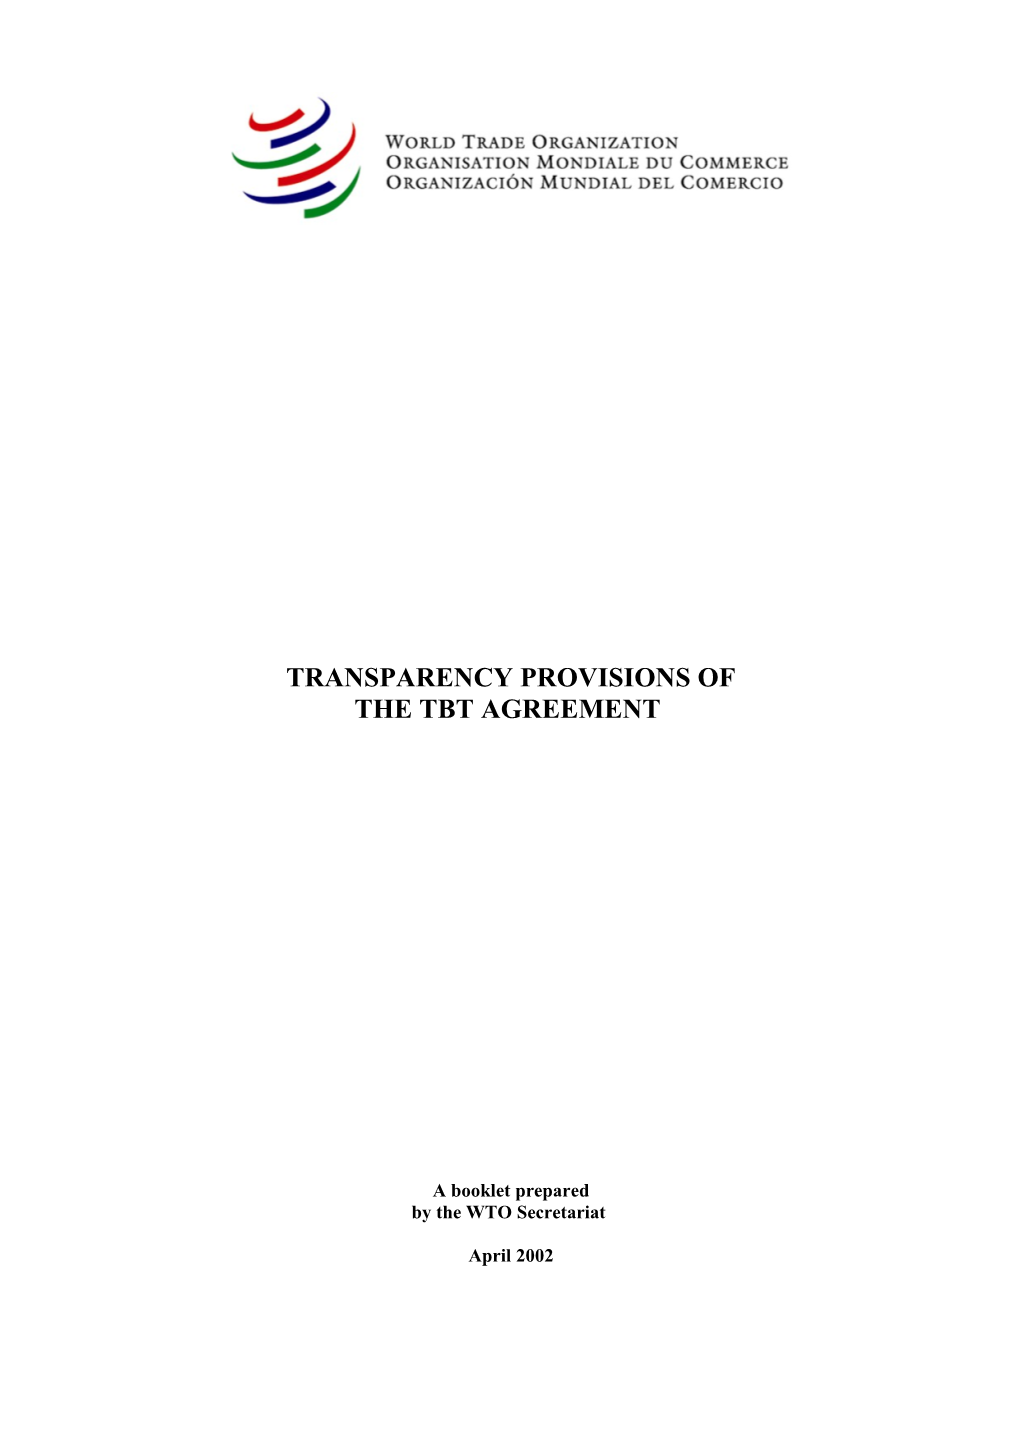 Transparency Provisions of the Tbt Agreement